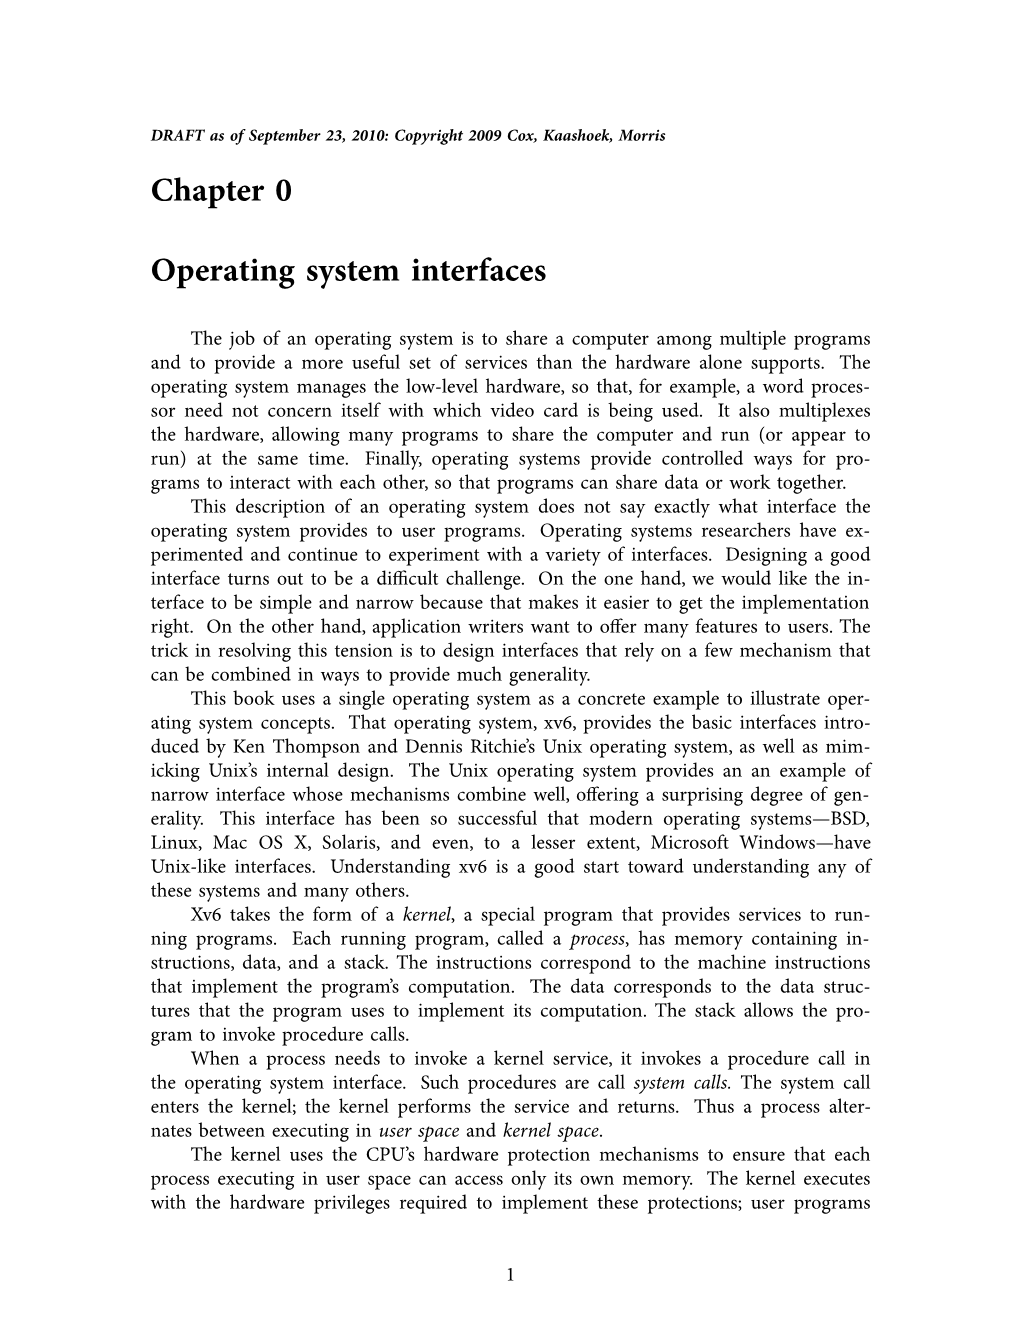 Chapter 0 Operating System Interfaces